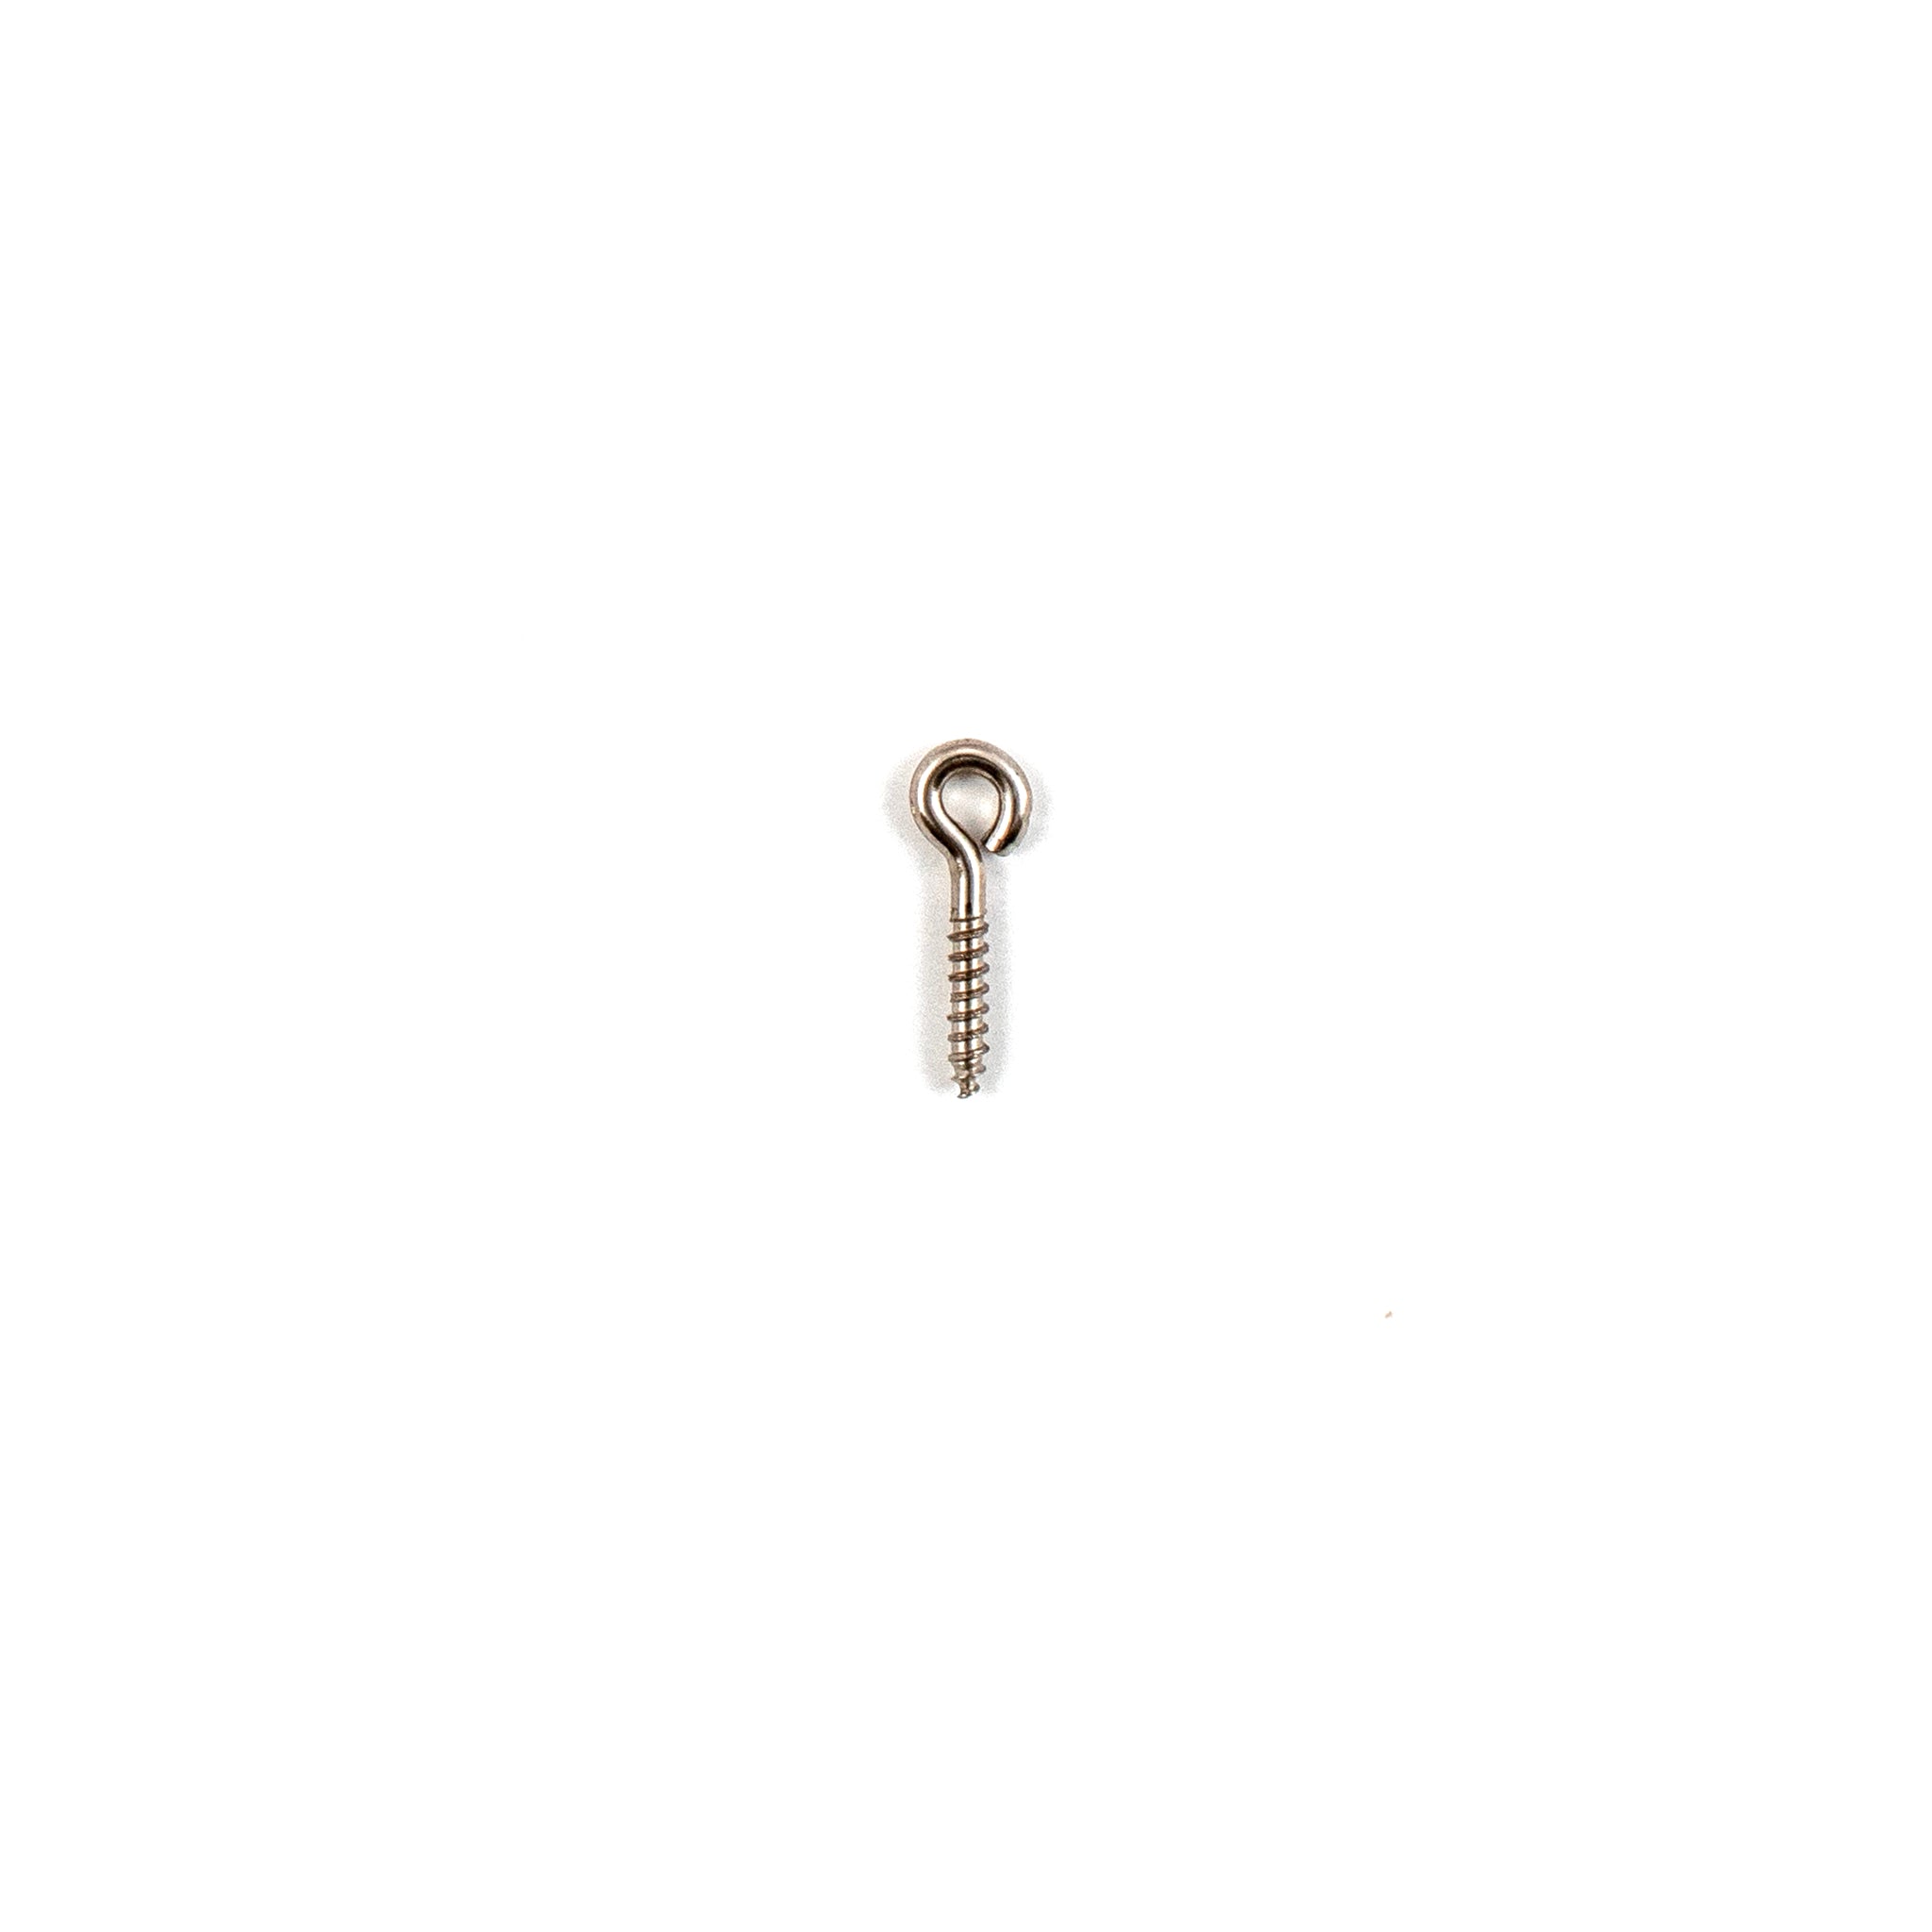 Double Action Flag -Eye Screws Replacement -4-Pack (#60116